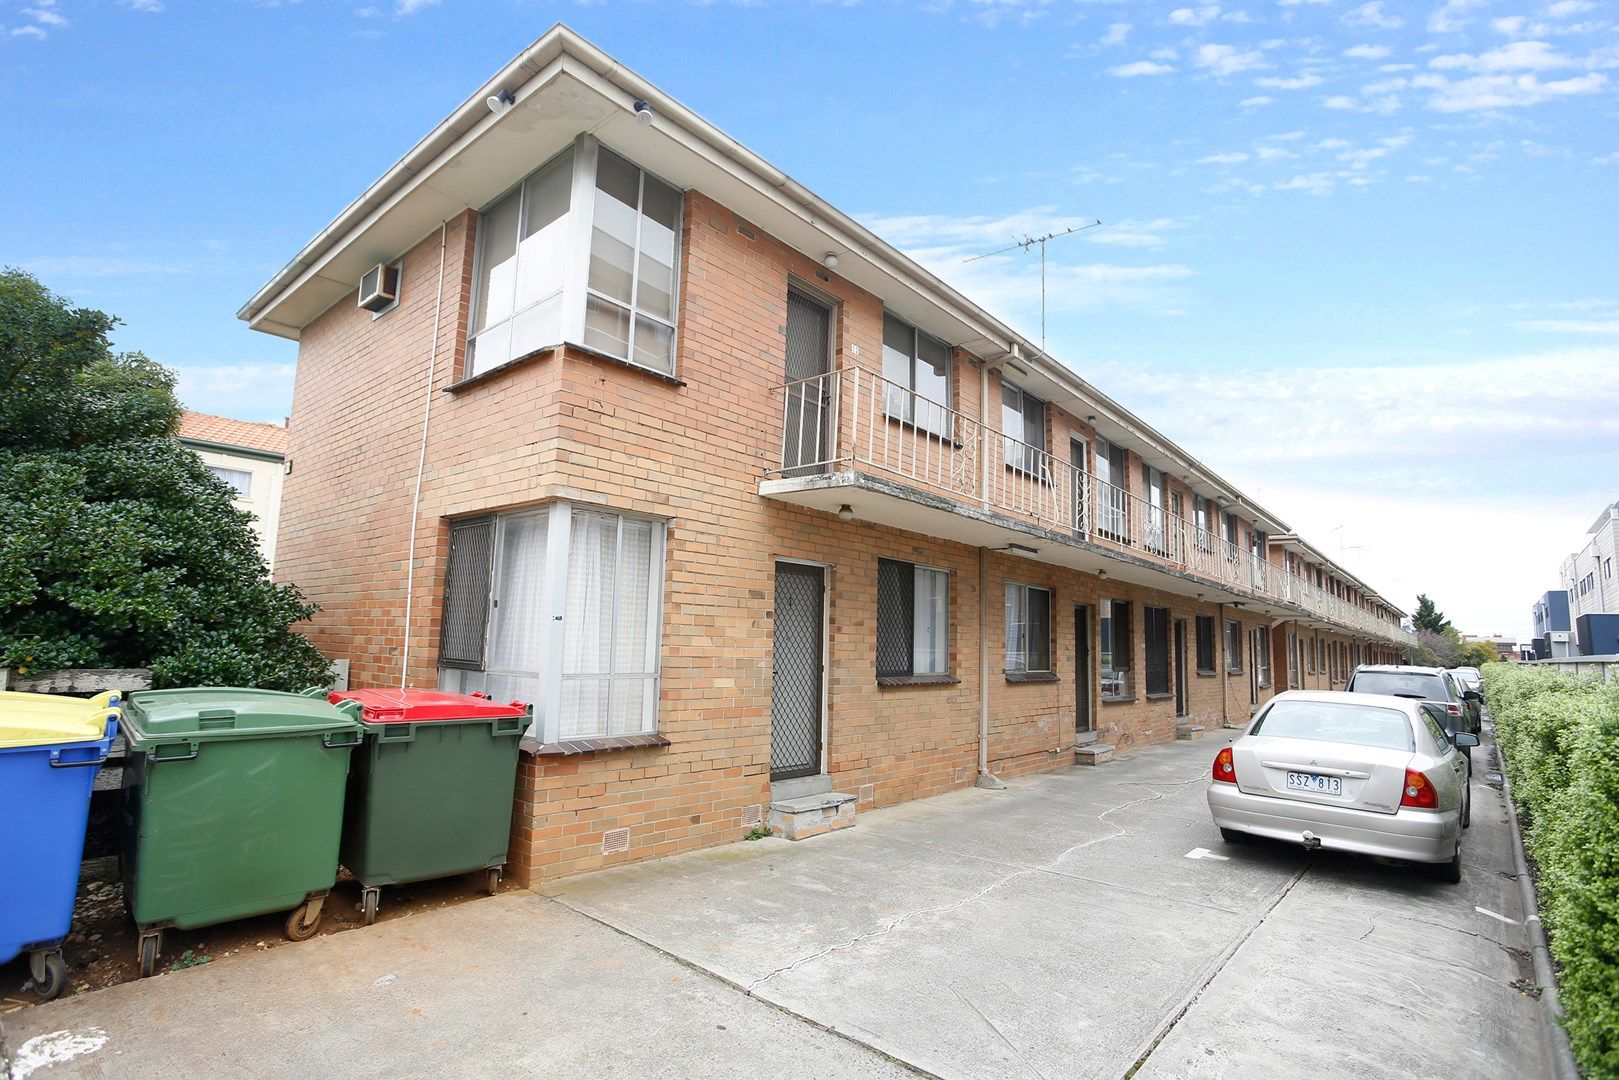 20/697 Barkly St, West Footscray VIC 3012, Image 0